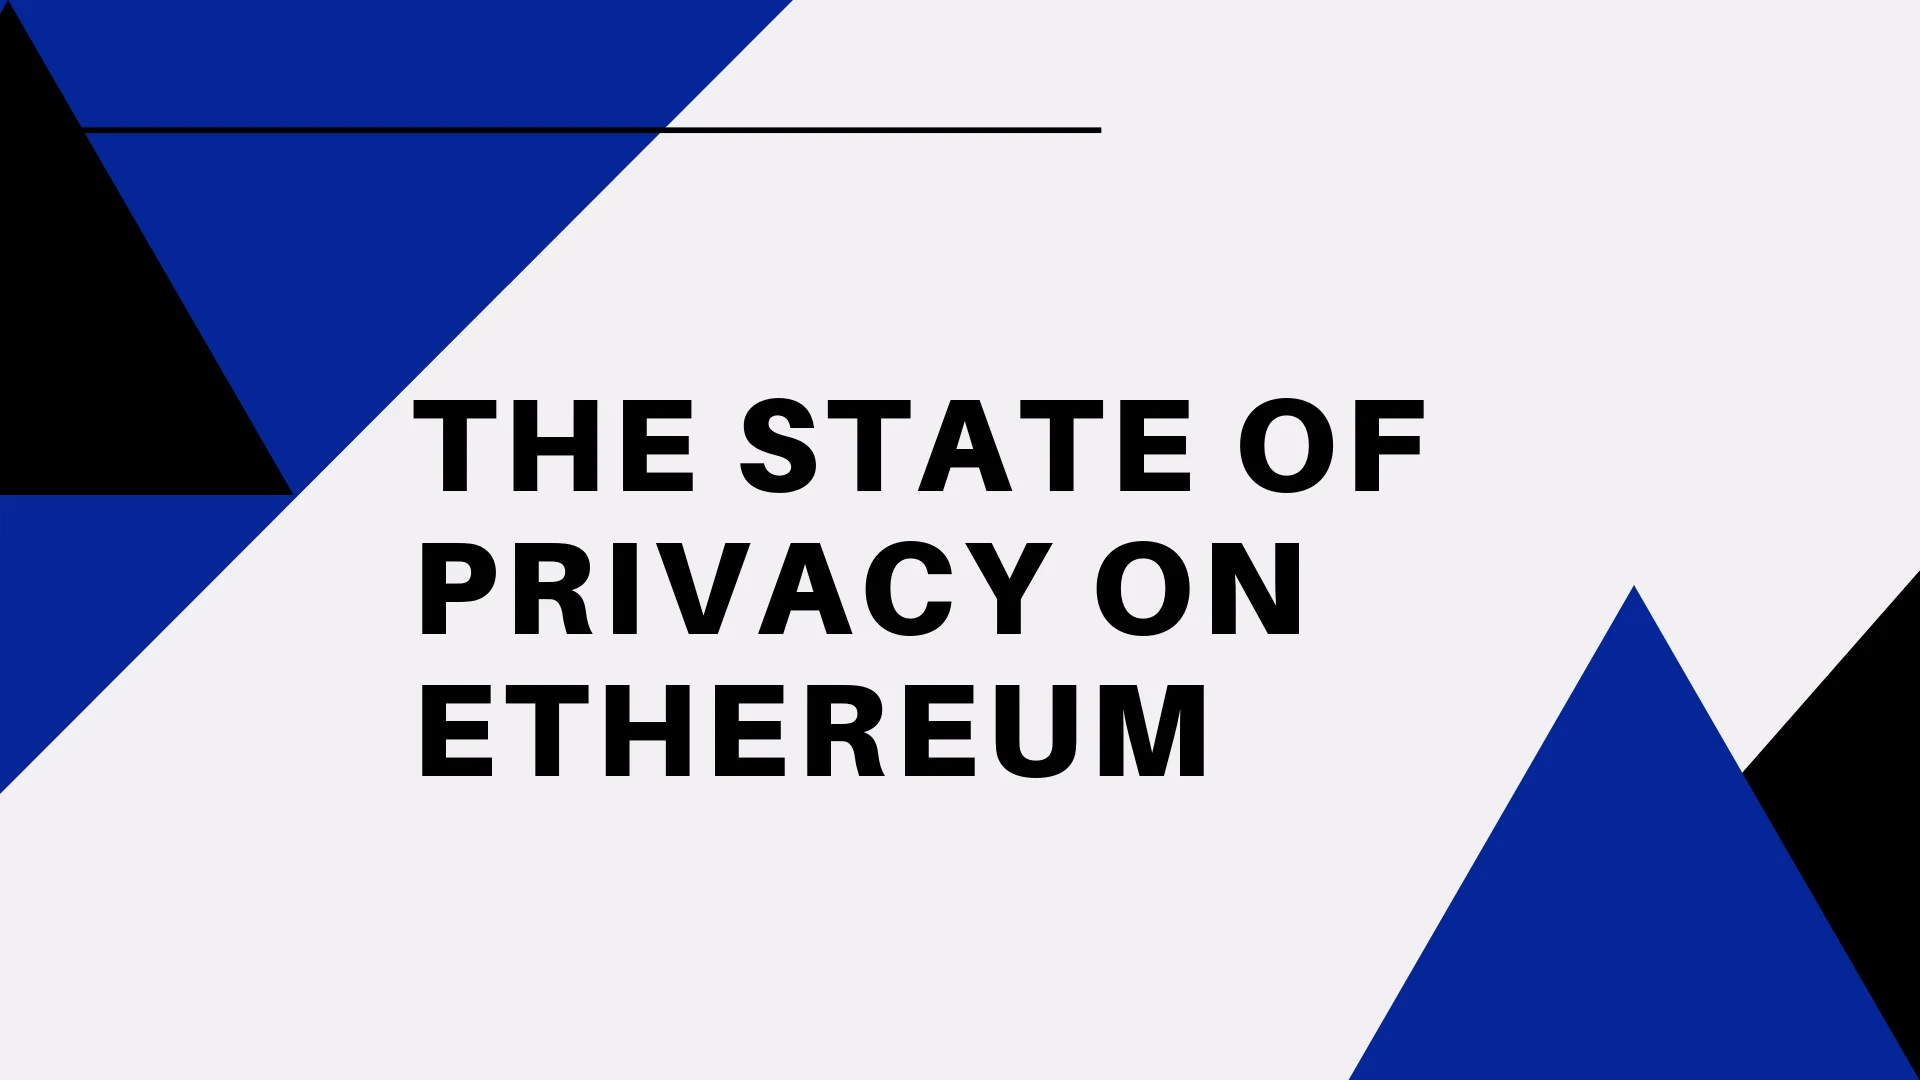 Image: The State of Privacy on Ethereum